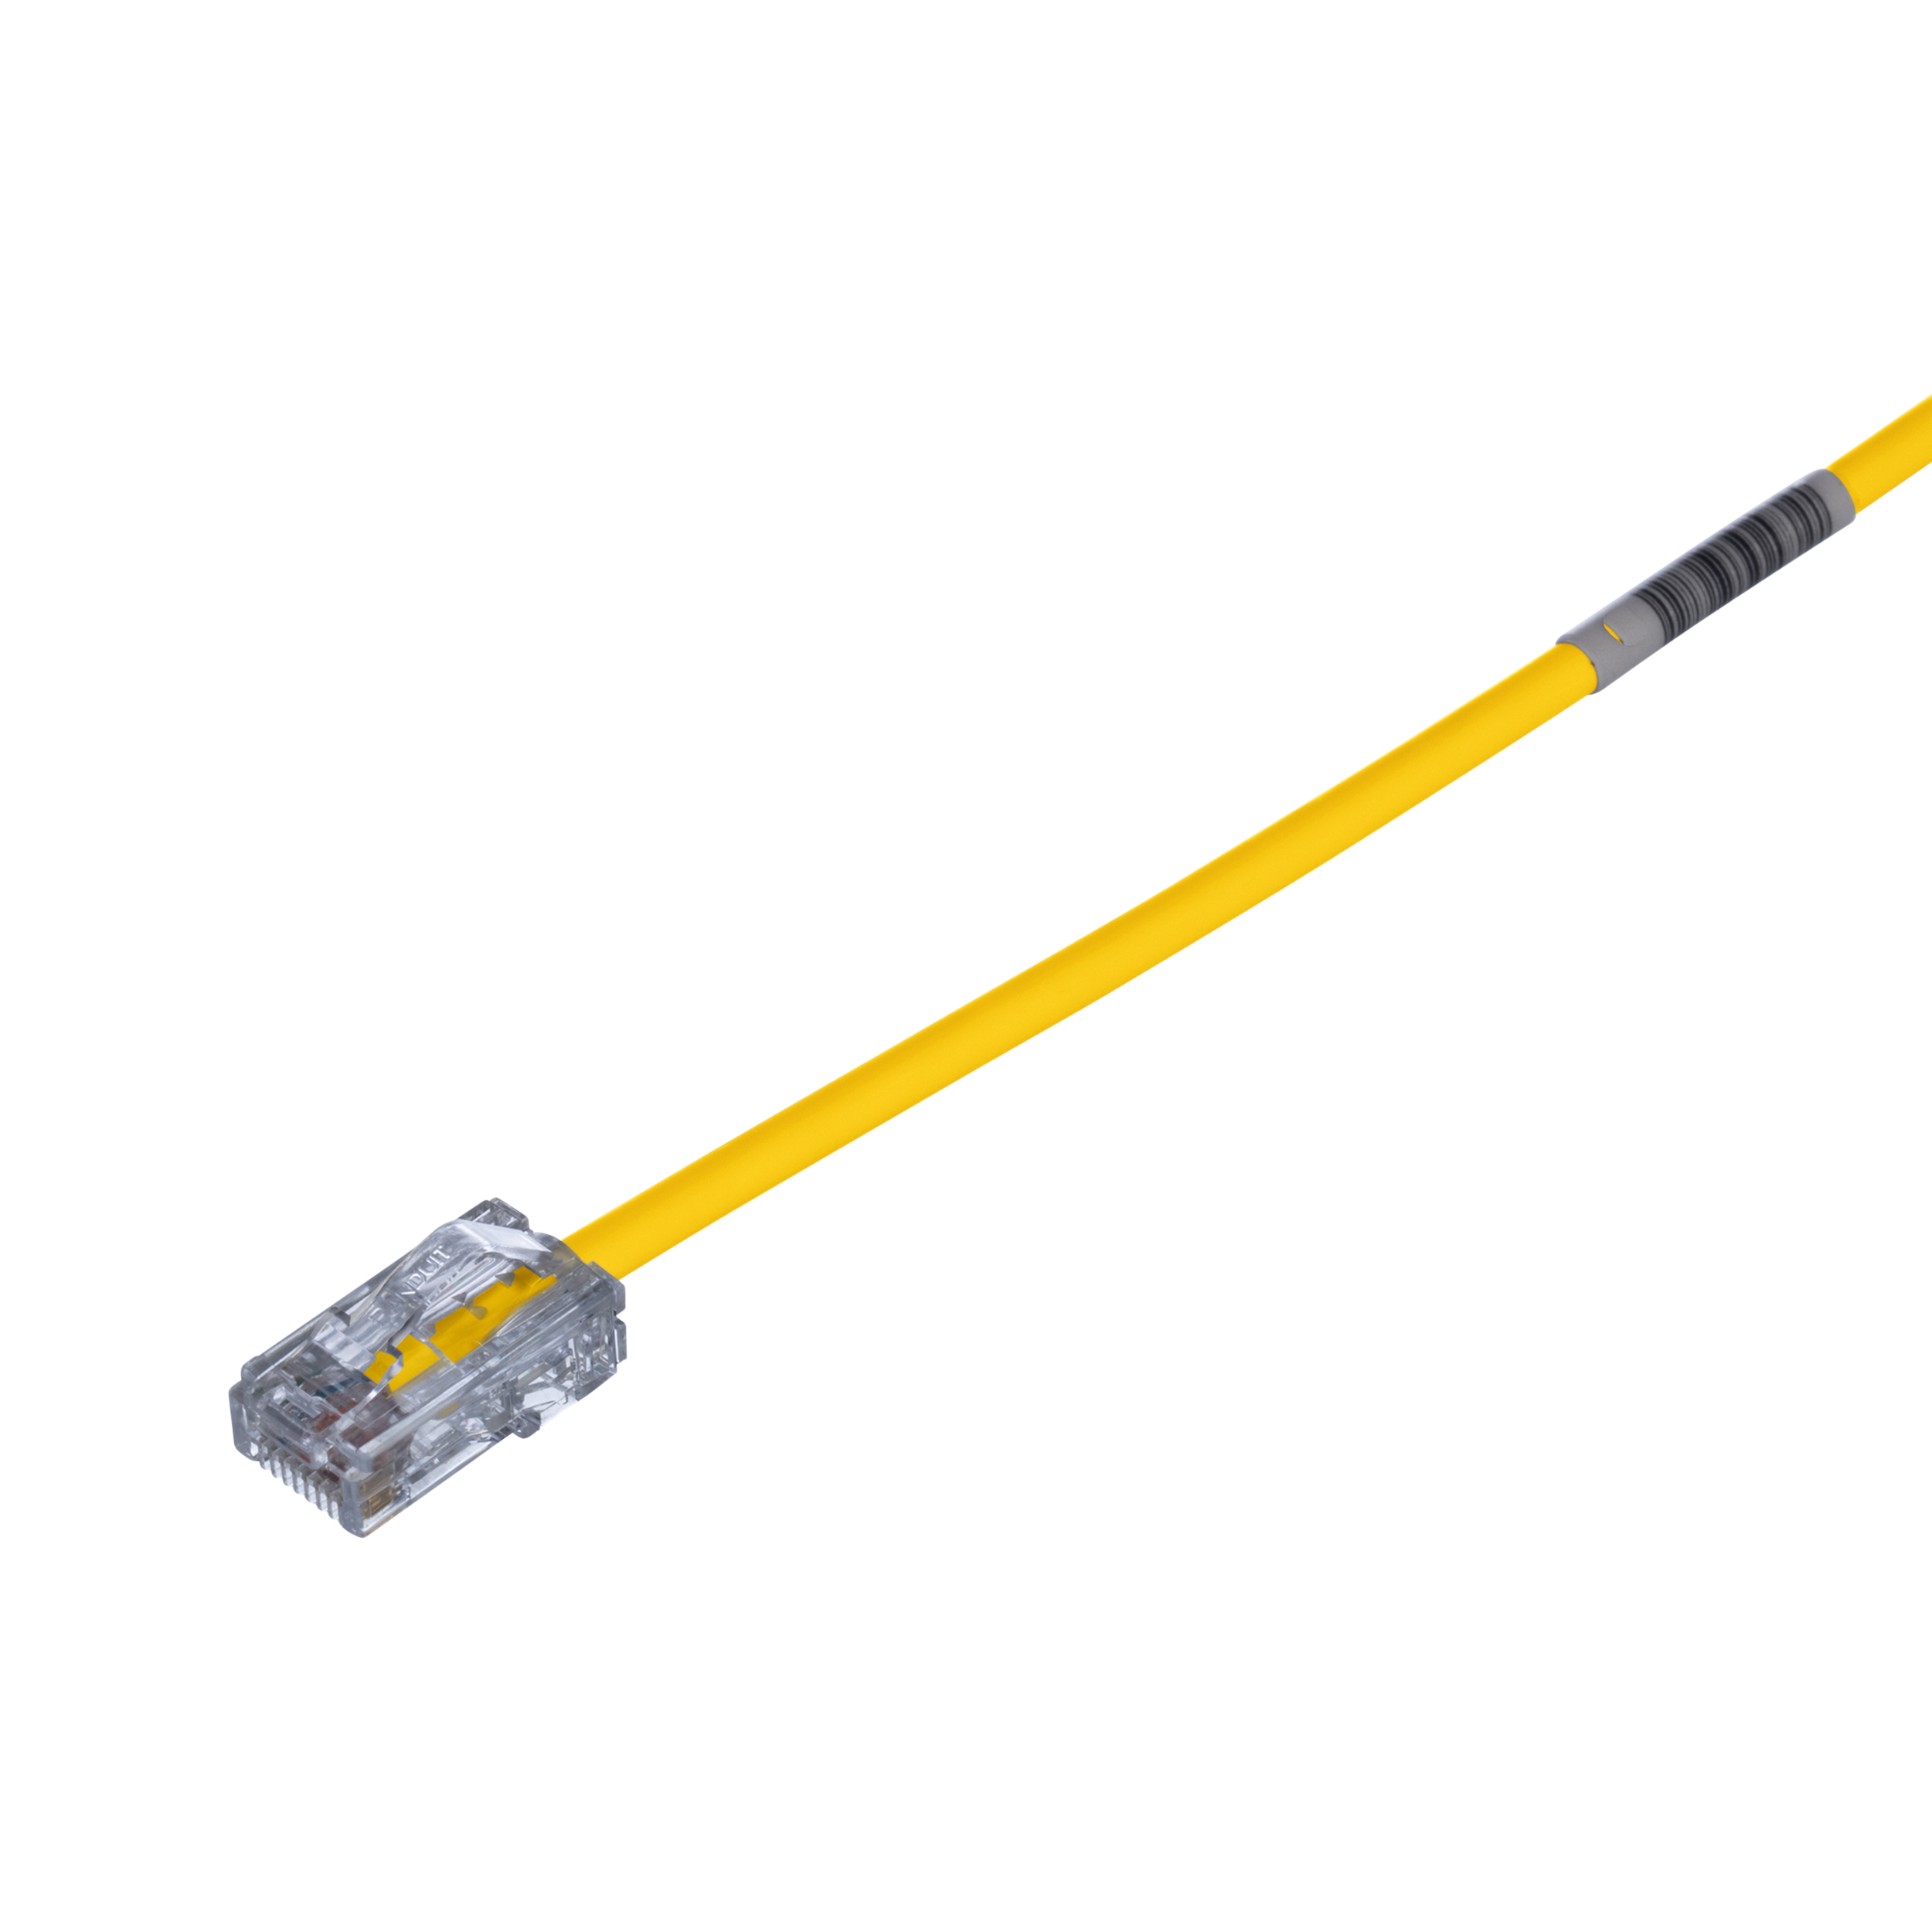 Cat 5e 28 AWG UTP Copper Patch Cord, 1 m, Yellow